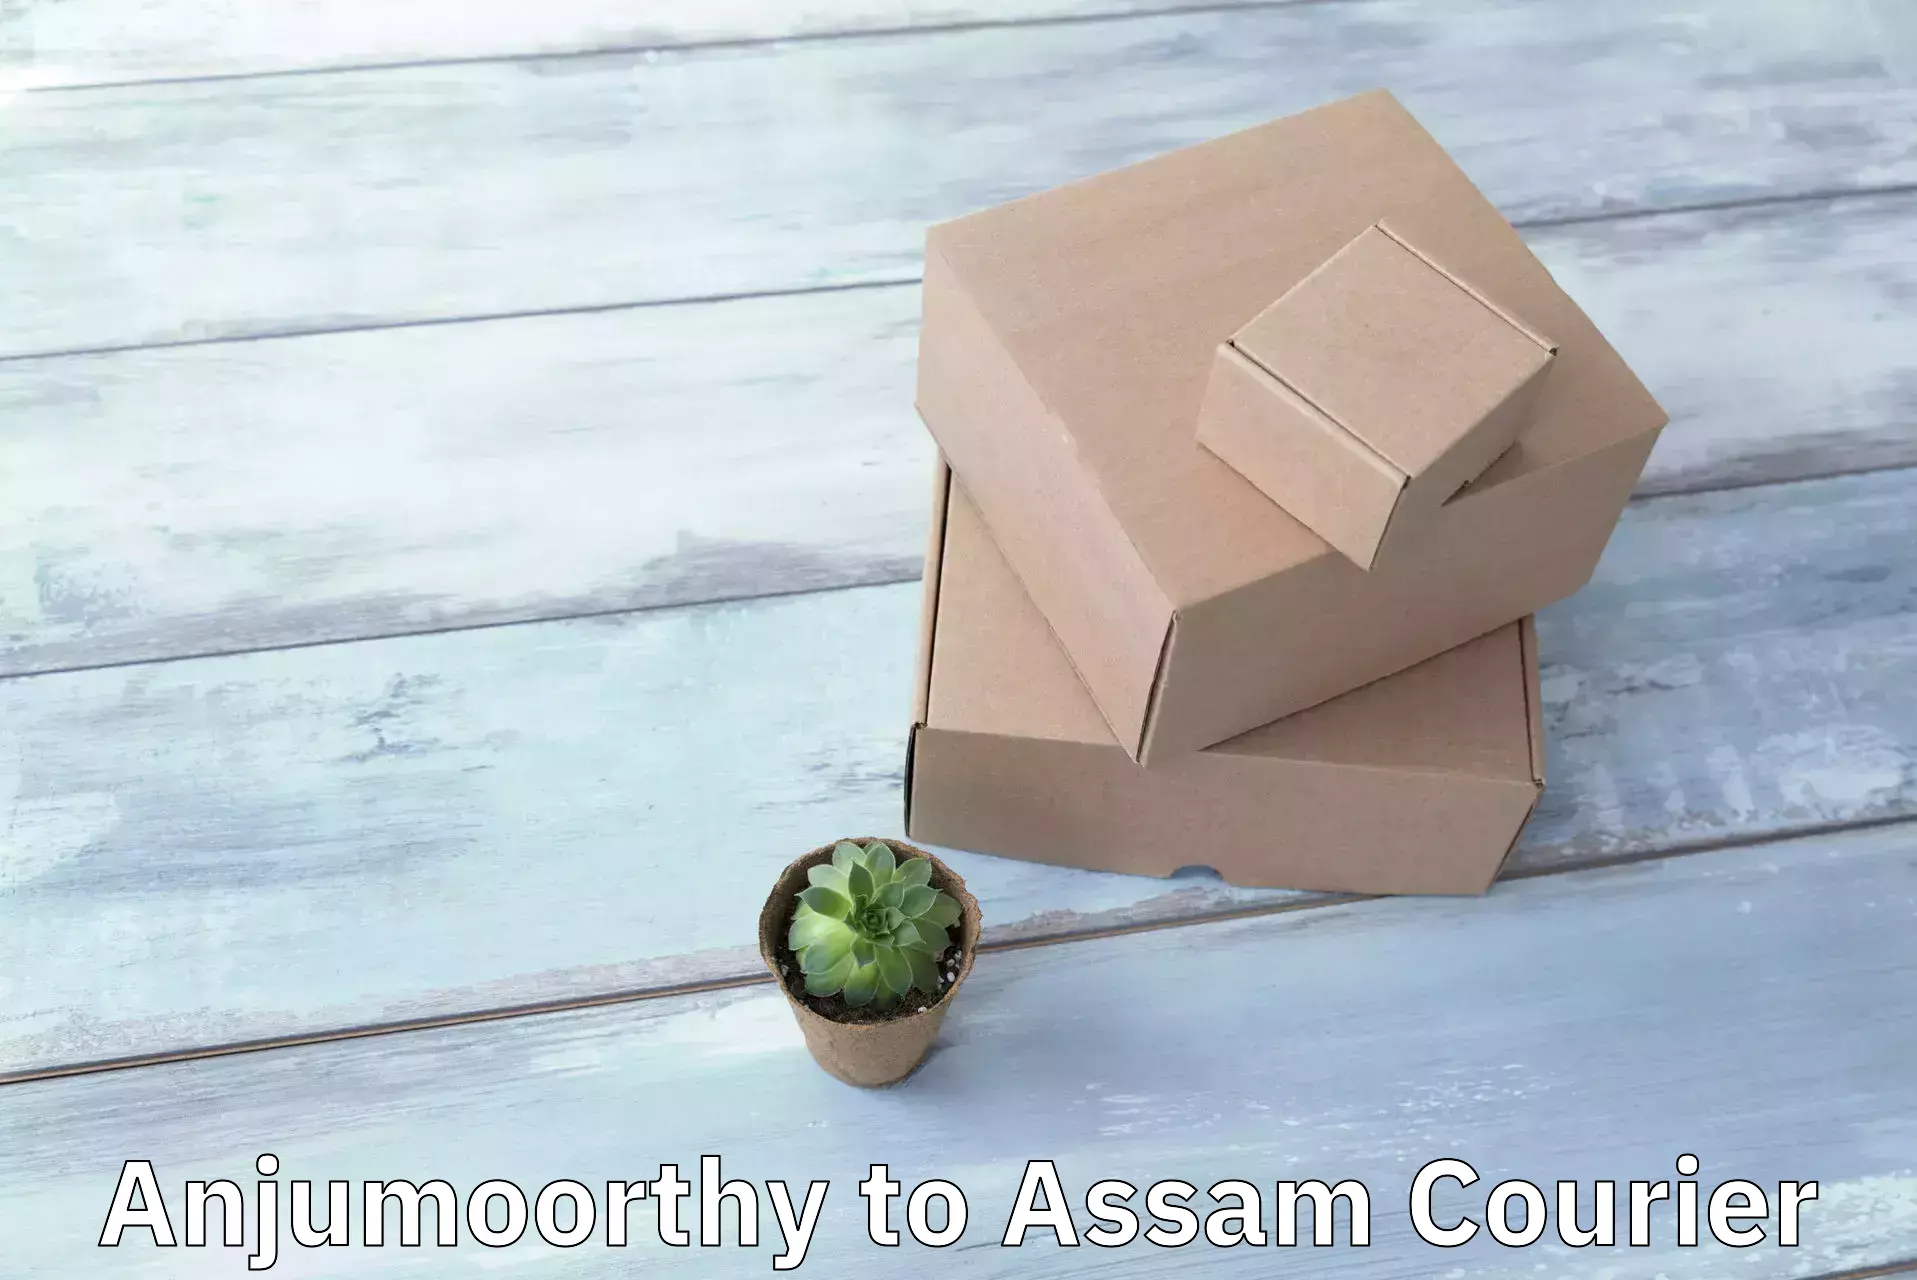 Business courier solutions Anjumoorthy to Kamrup